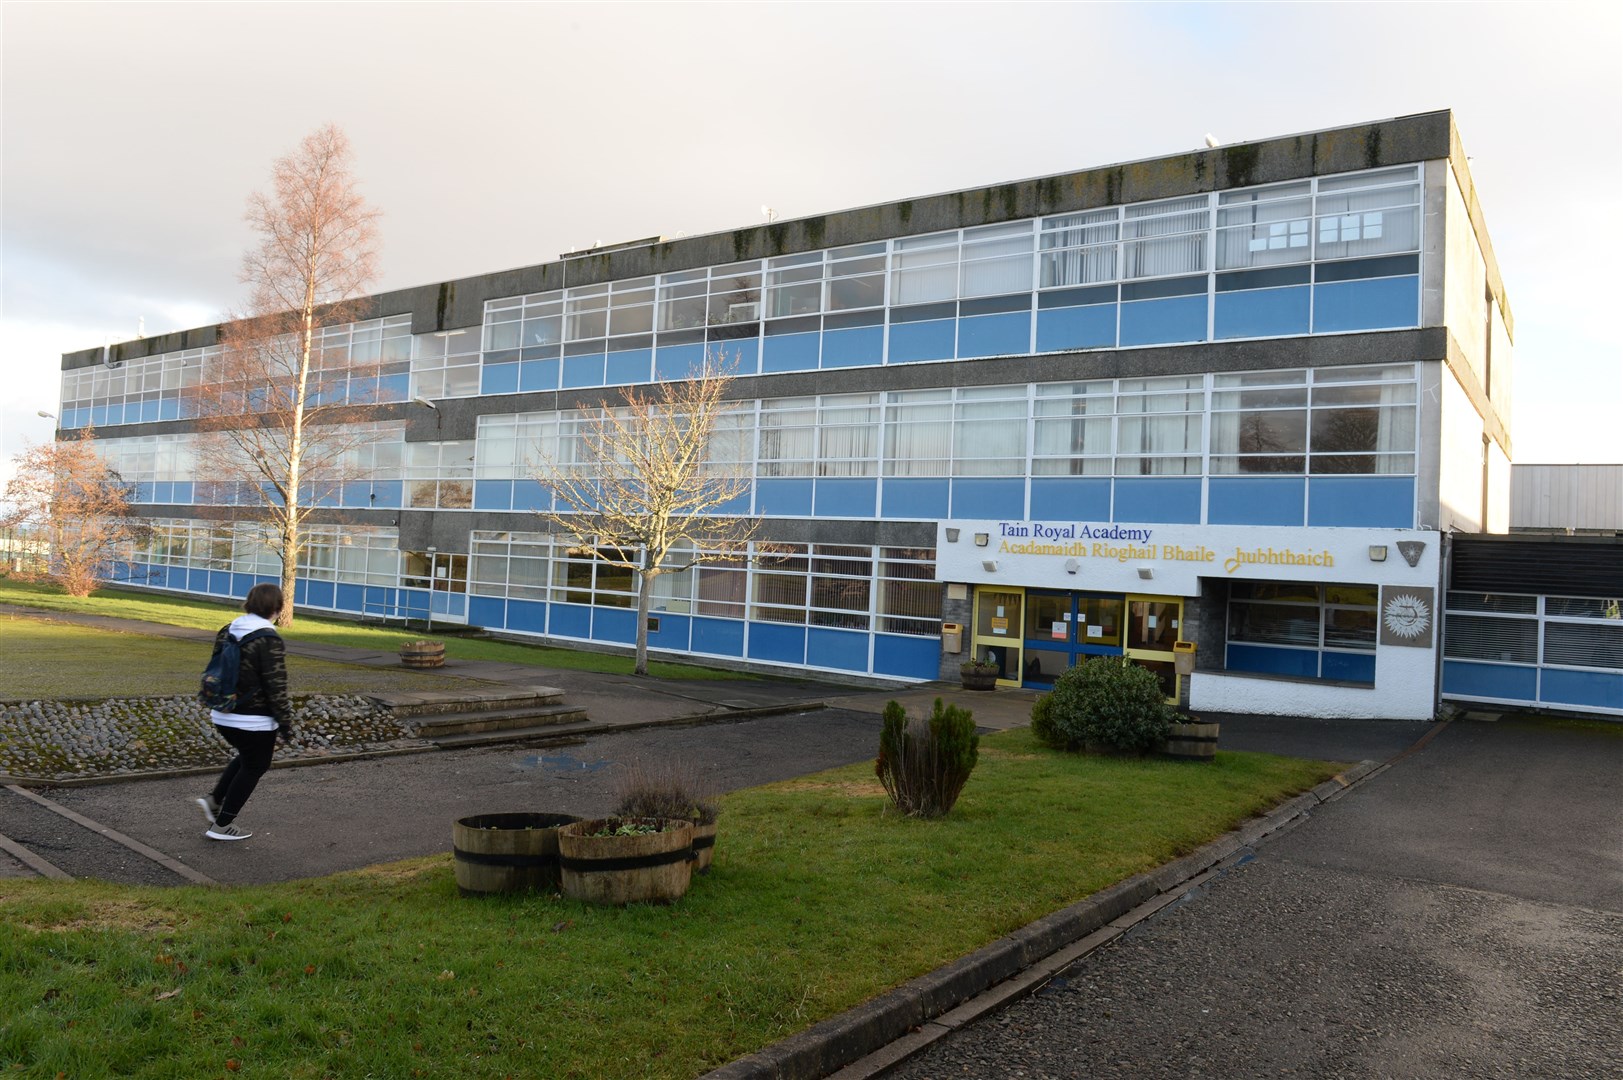 Tain Royal Academy is sorting through its lost property box after schools broke up for summer.